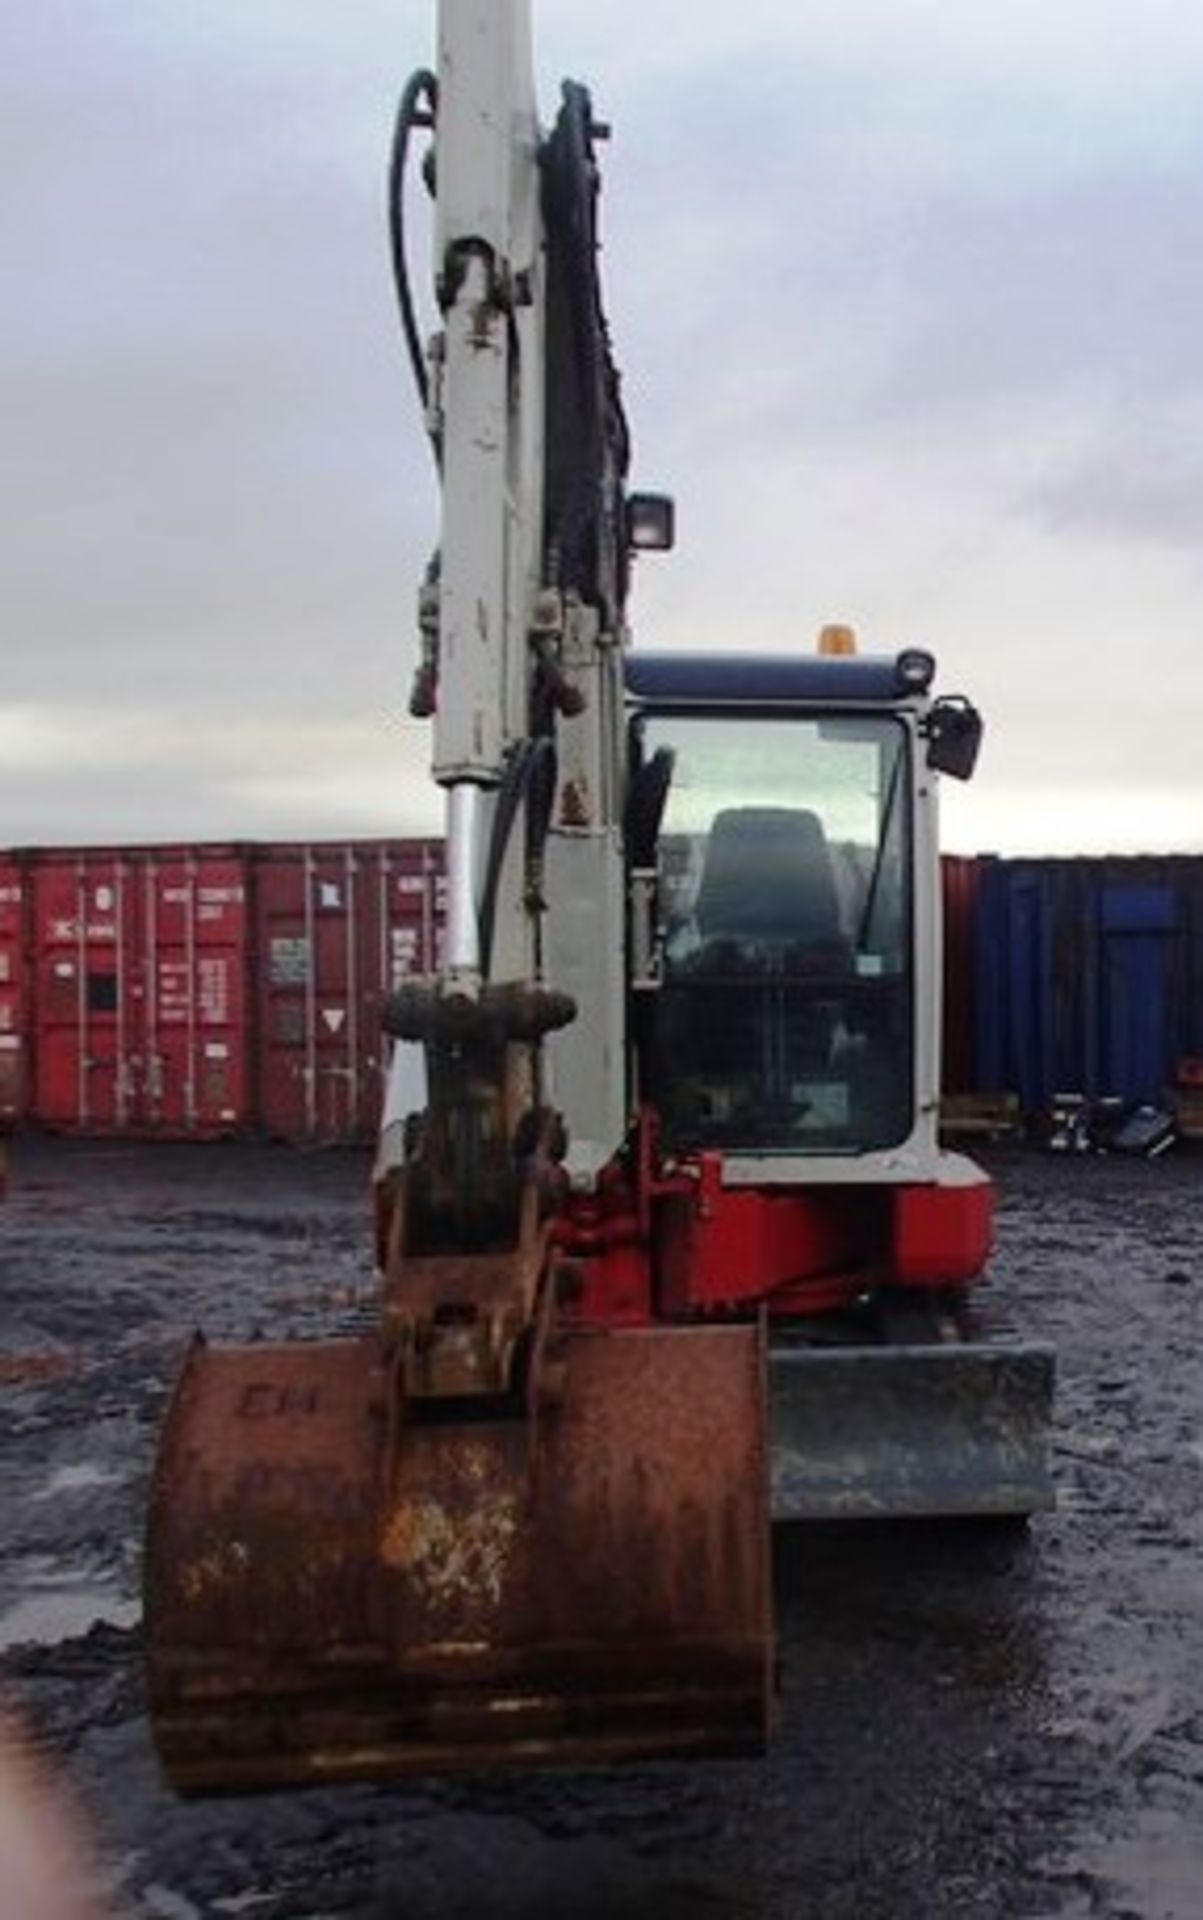 2013 TAKEUCHI TB153FR EXCAVATOR, SN 158301909, 4405 HOURS (NOT VERIFIED), AUX PIPE WORK, HYDRAULIC - Image 6 of 13